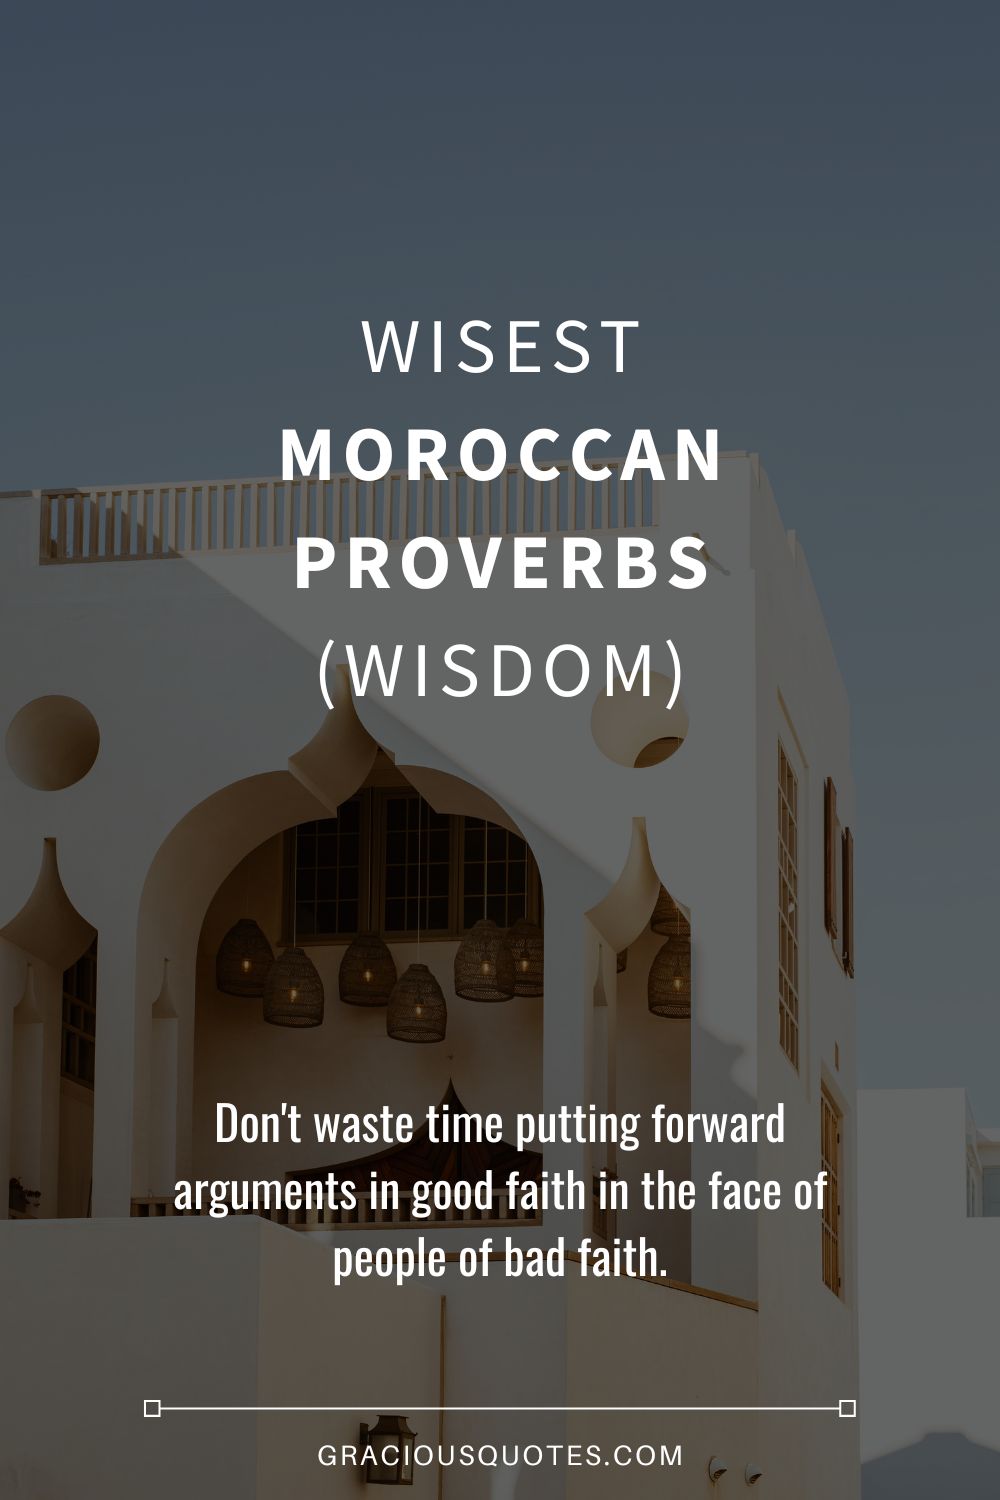 Wisest Moroccan Proverbs (WISDOM) - Gracious Quotes